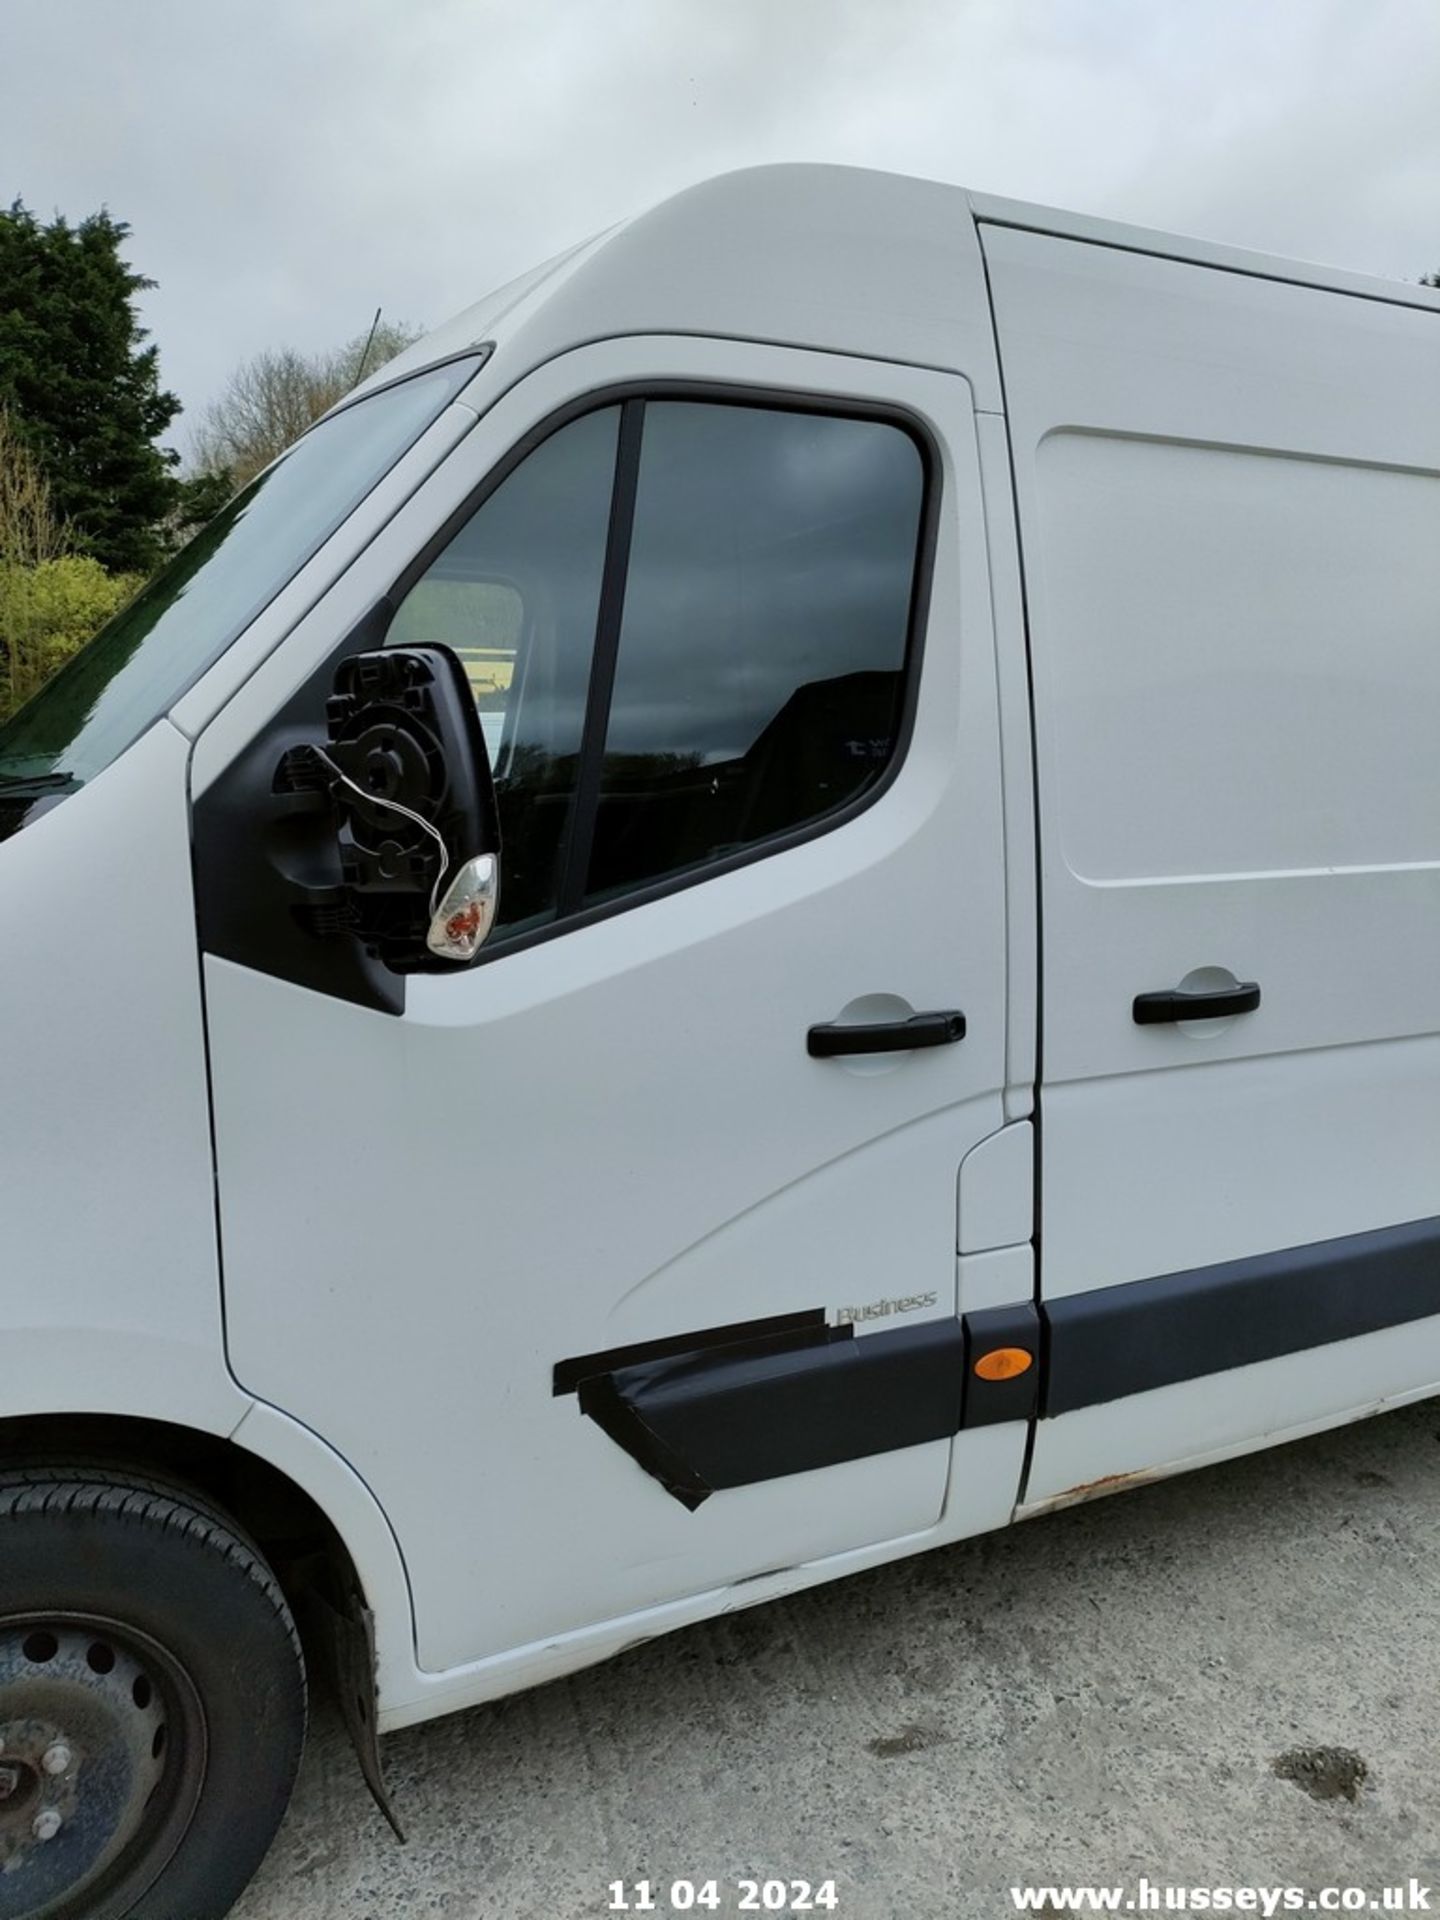 18/68 RENAULT MASTER LM35 BUSINESS DCI - 2298cc 5dr Van (White) - Image 26 of 68